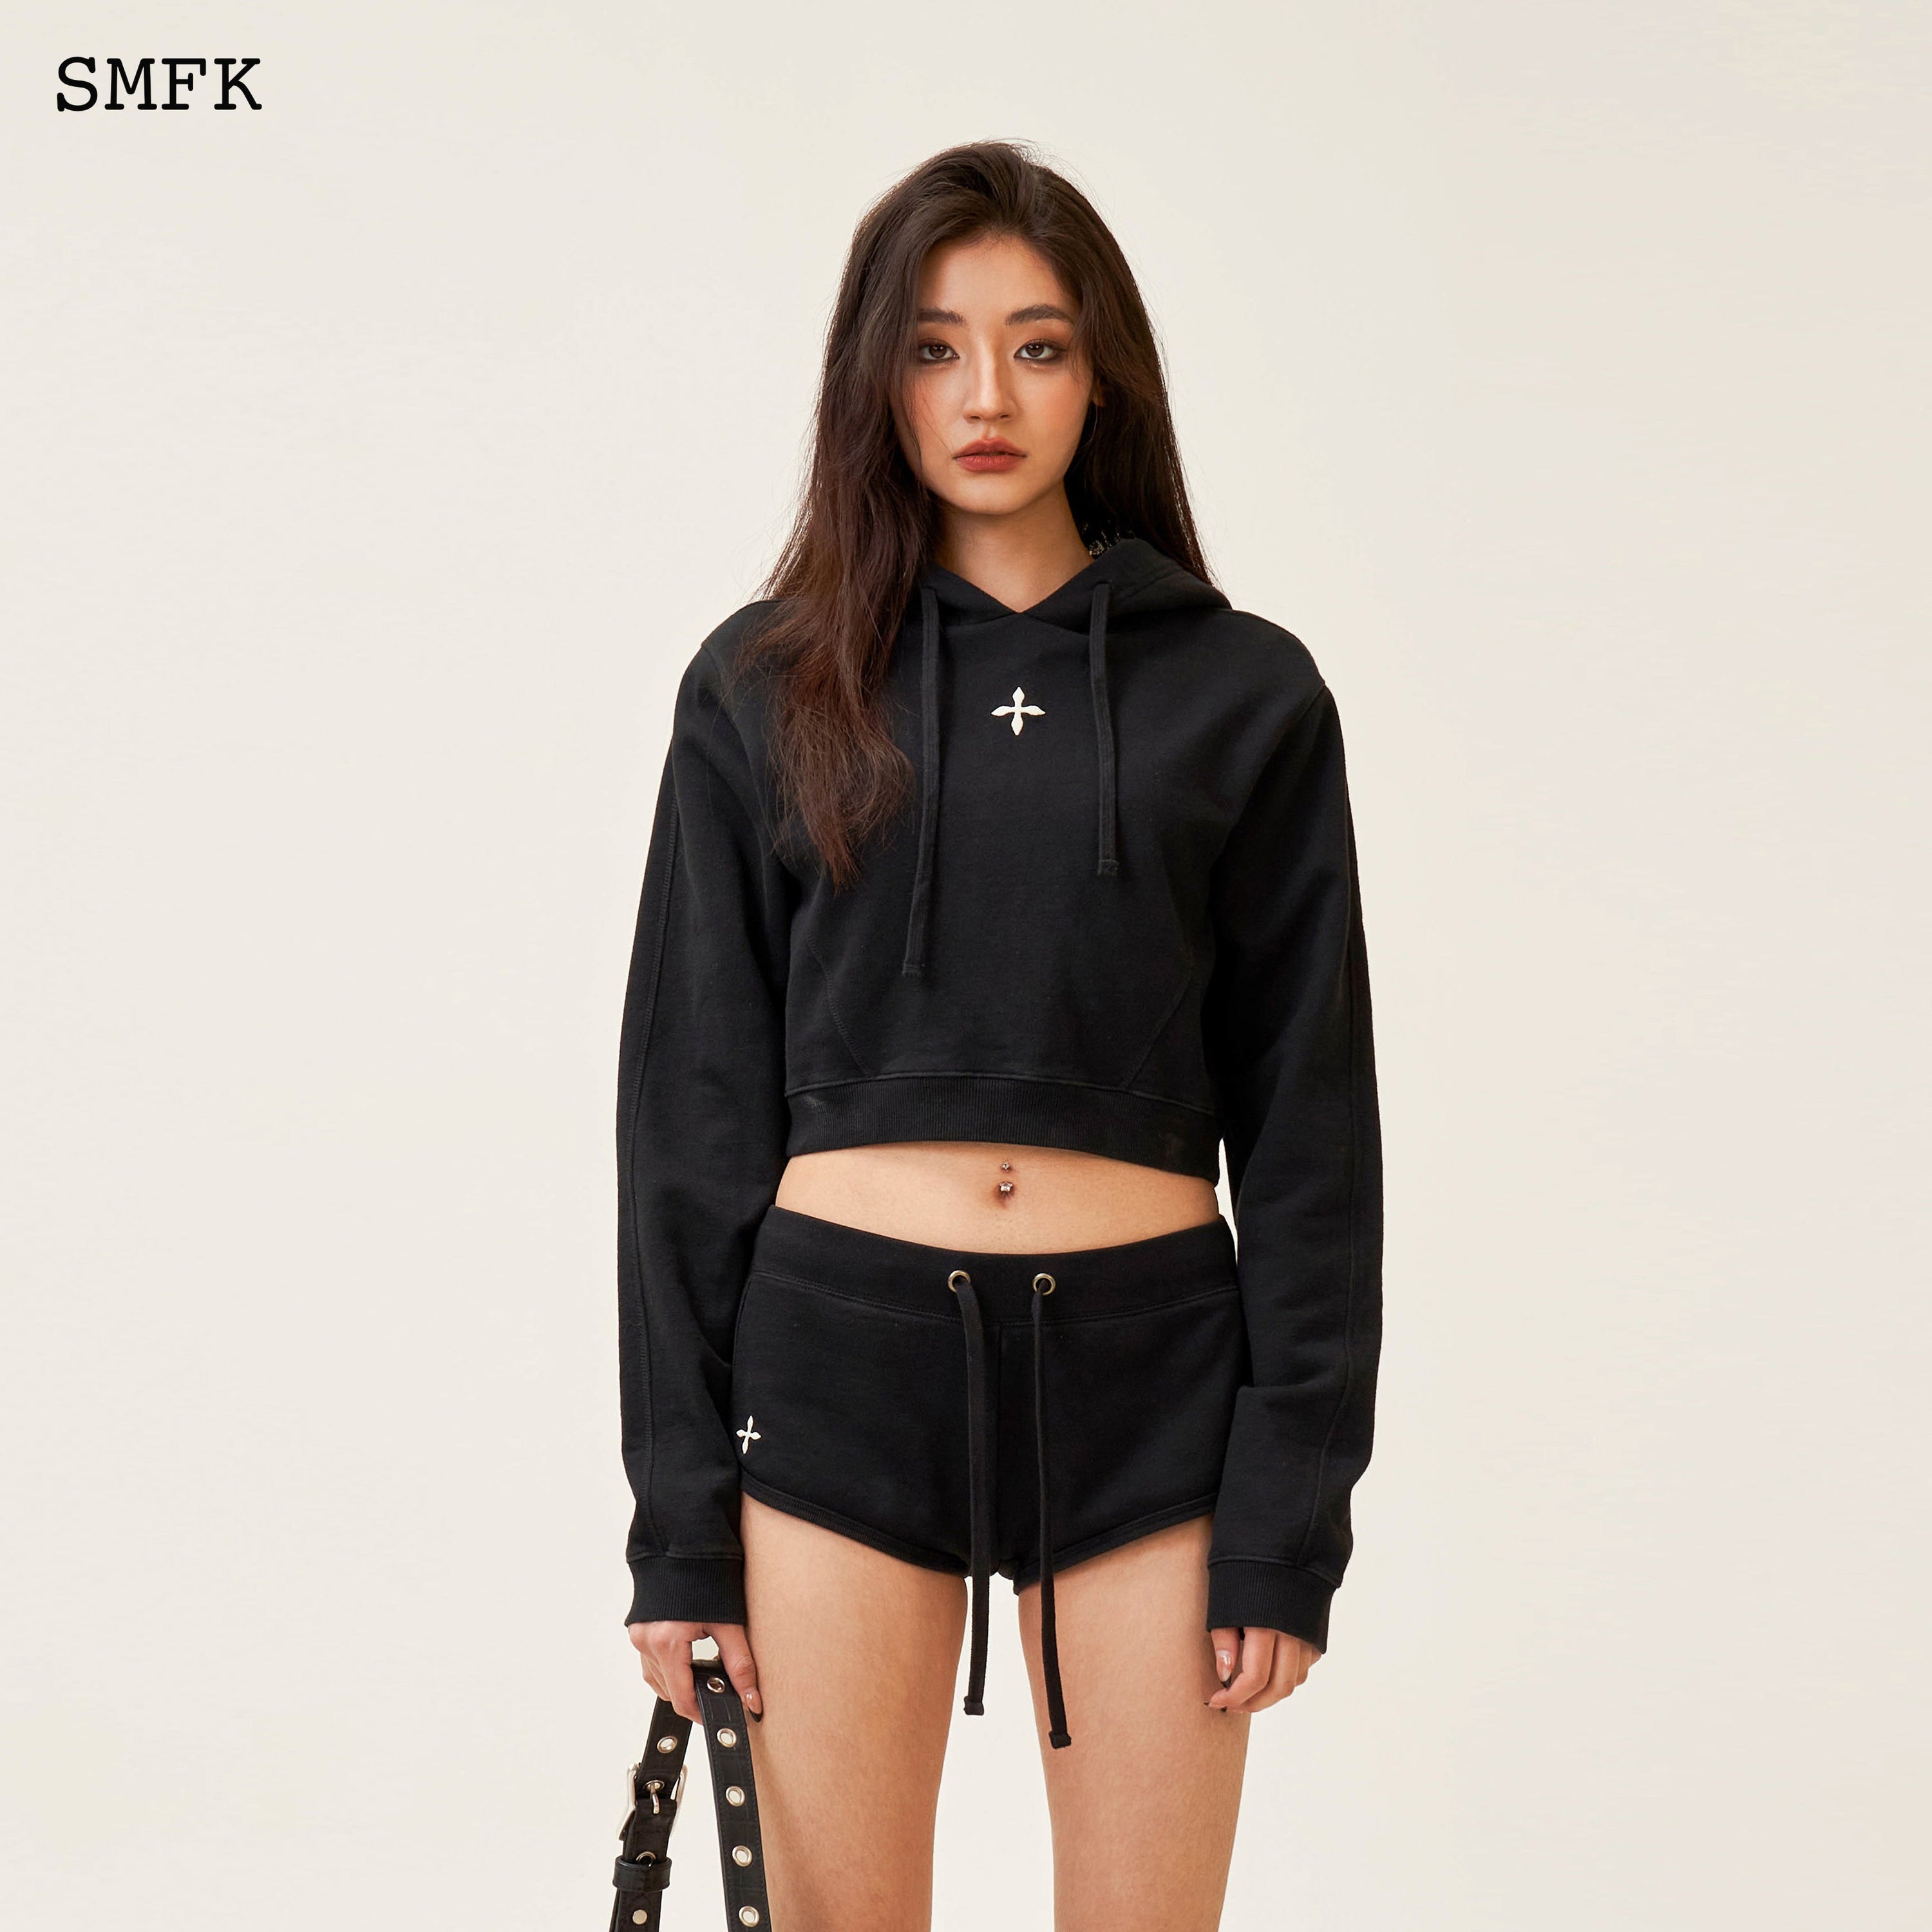 Compass Rush Training Hoodie In Black - SMFK Official